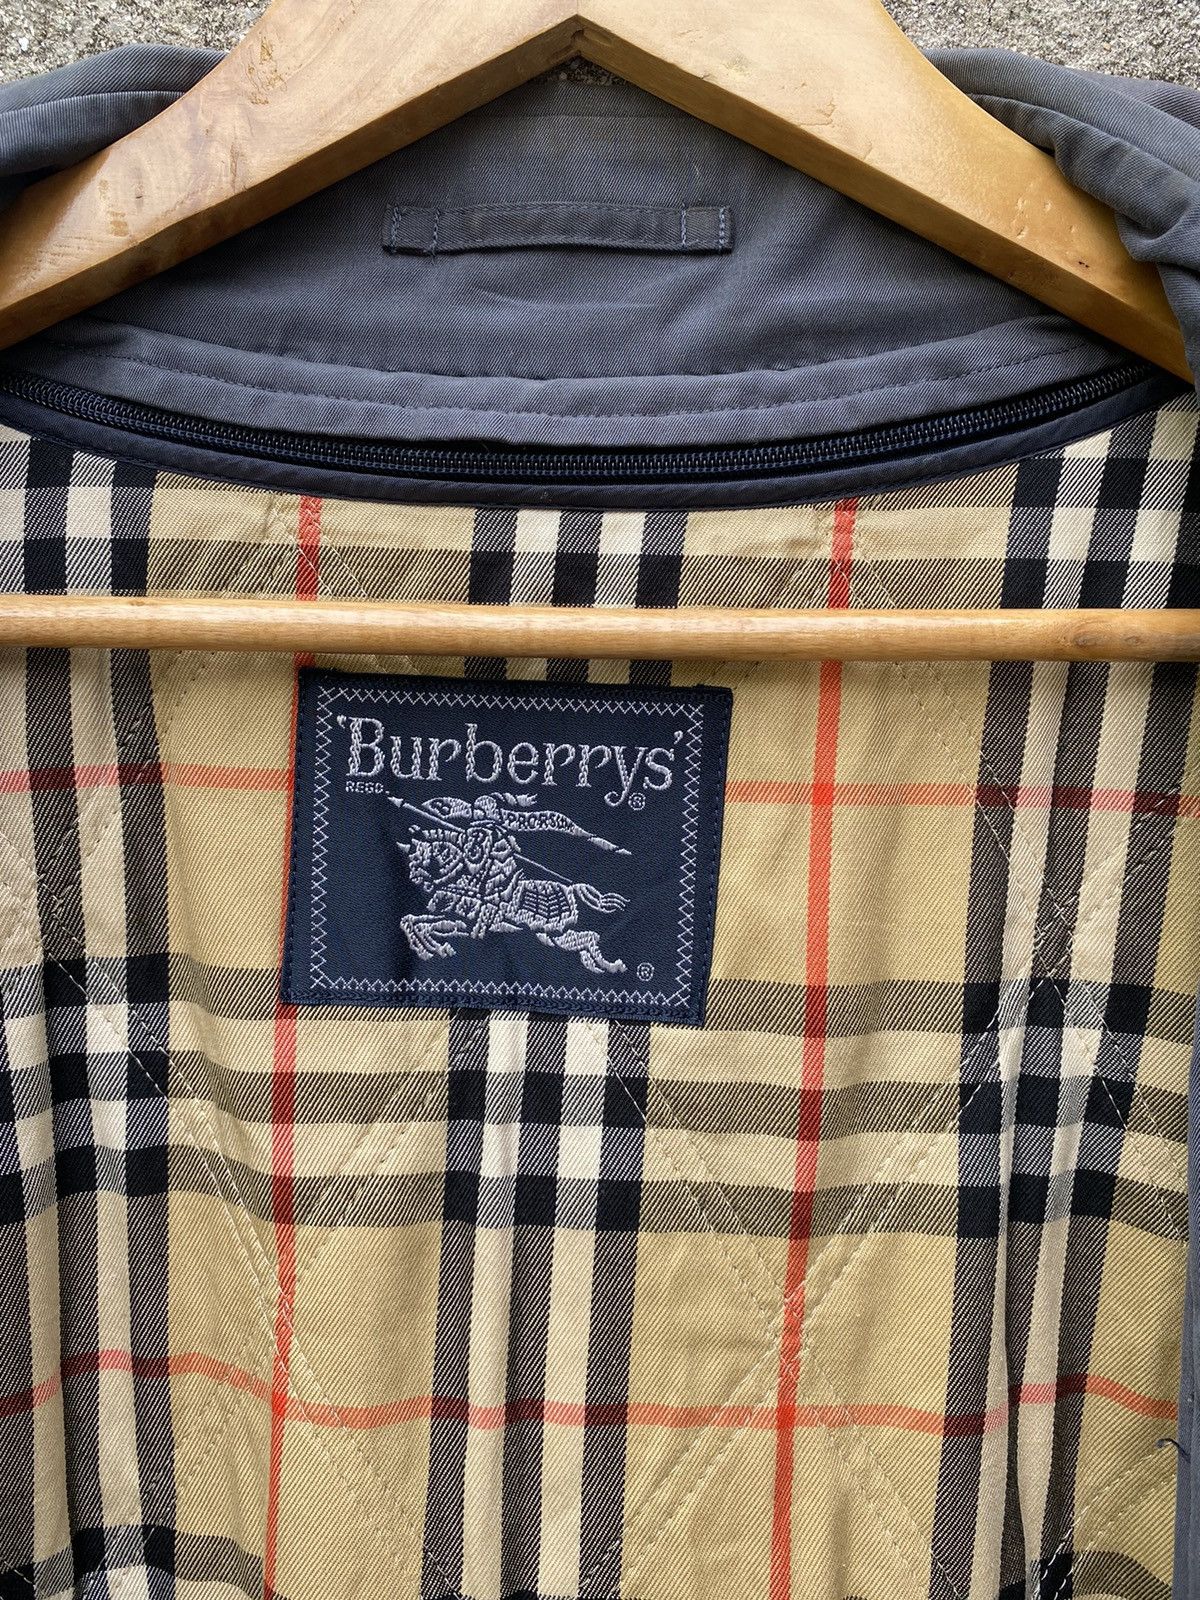 Vintage Burberry’s Single Breasted Nova Check Trench Coat - 6